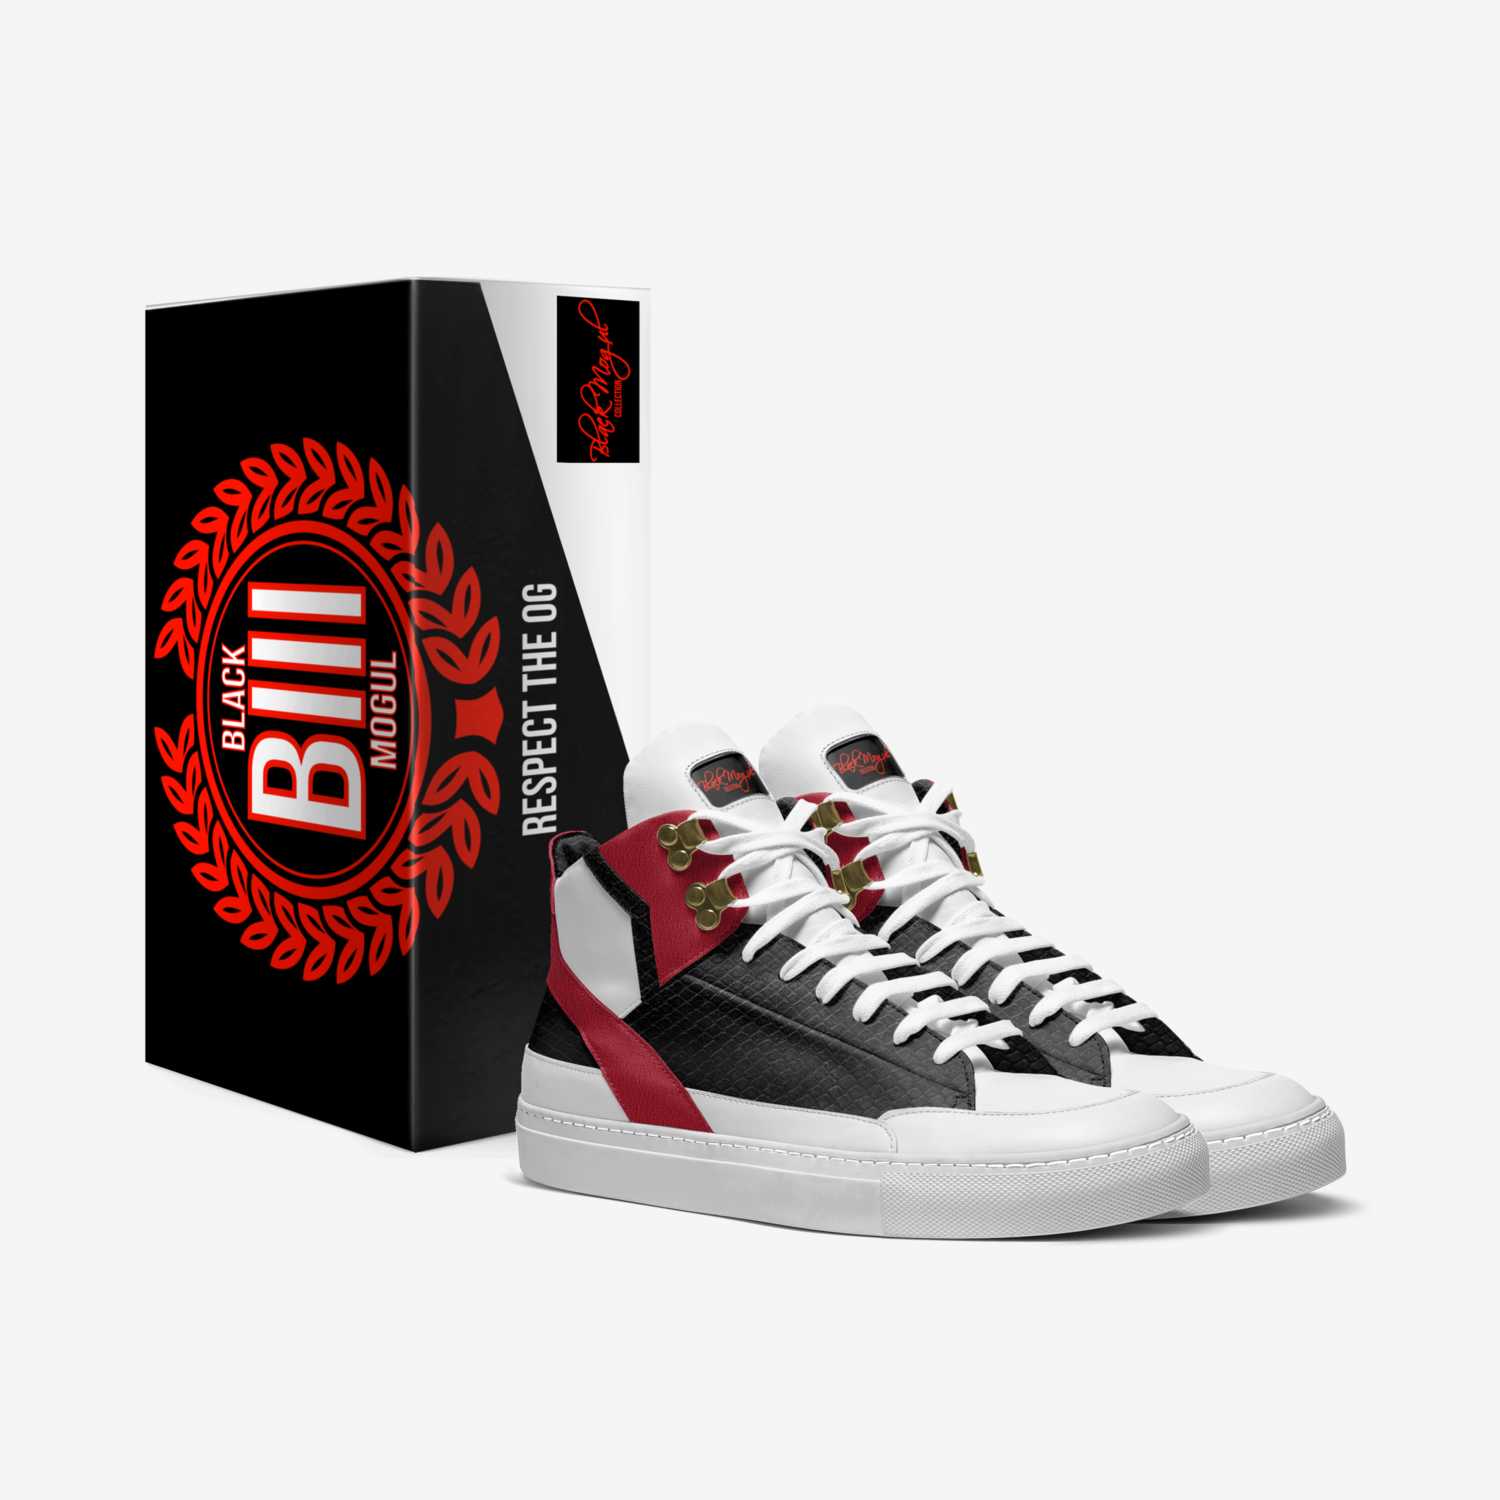 MOGUL OG HIGHS custom made in Italy shoes by Black Mogul Collection | Box view